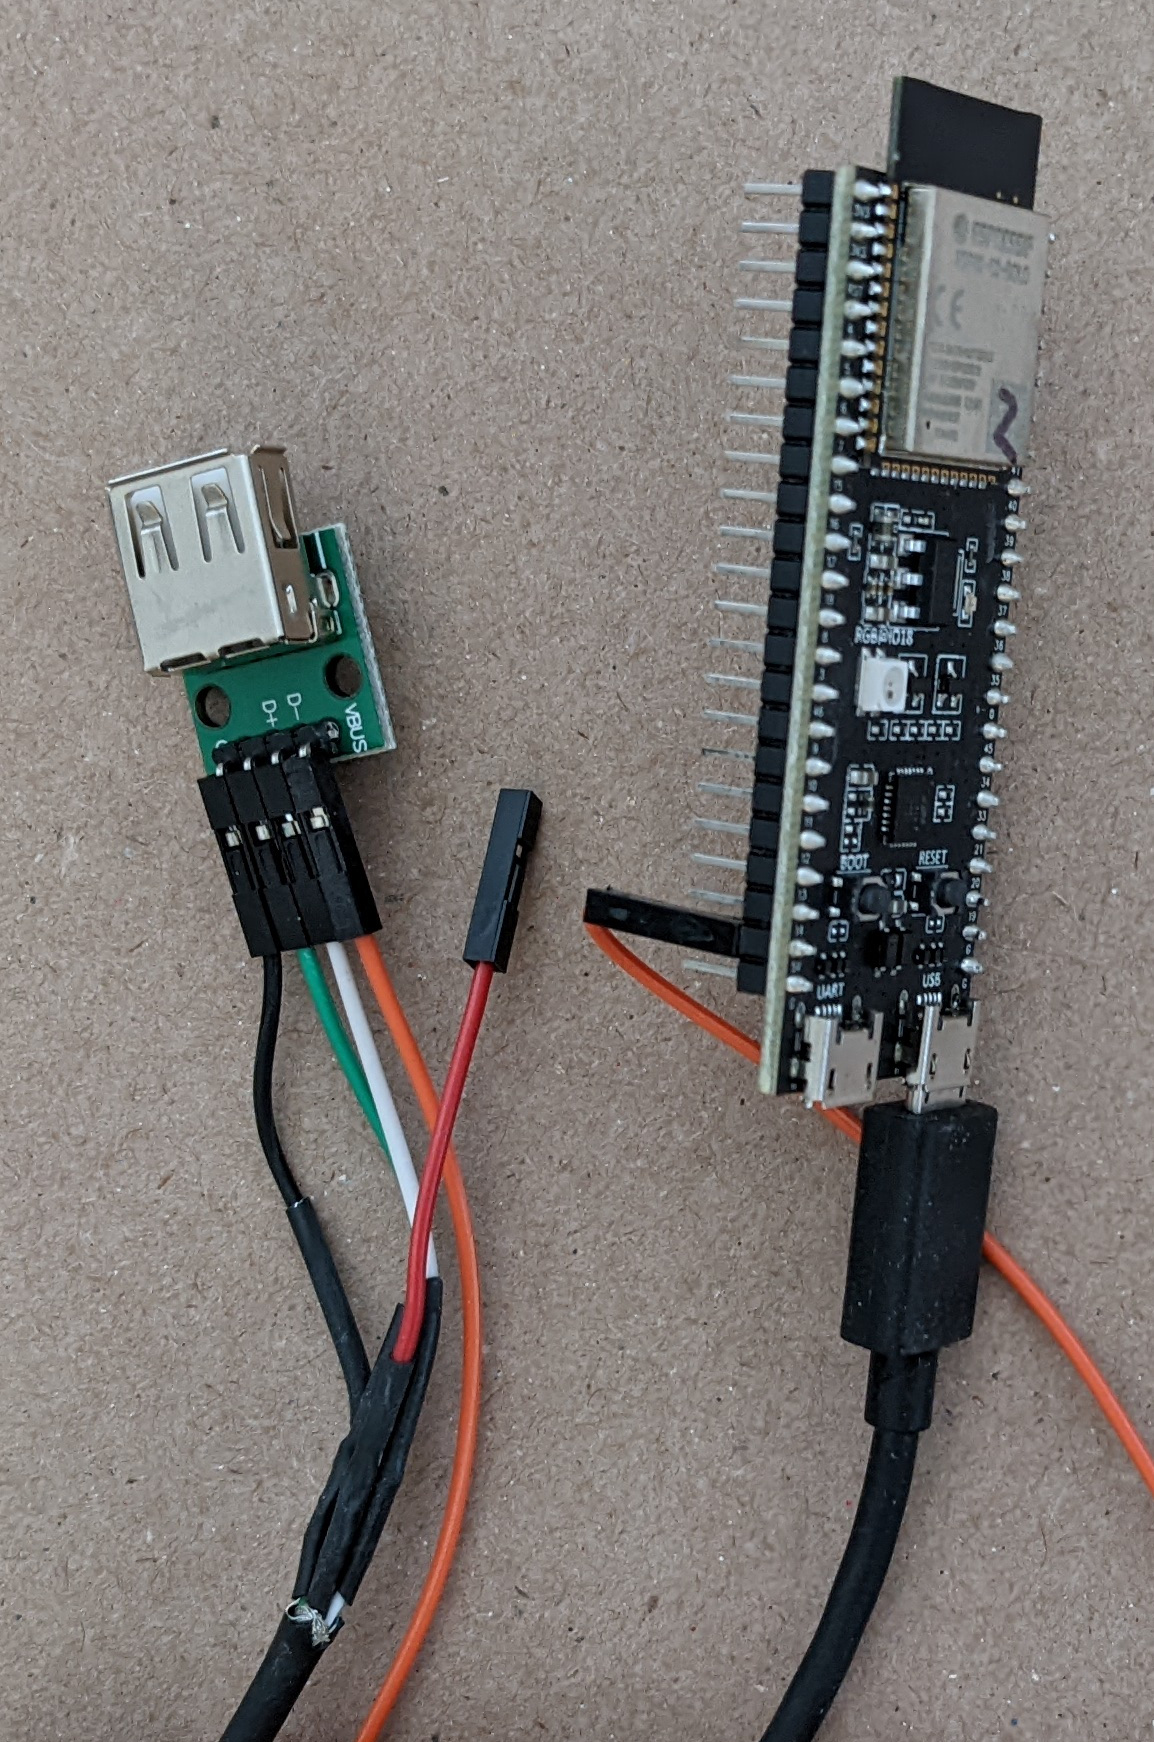 USB host cable connected to ESP32 S2 DevKitC